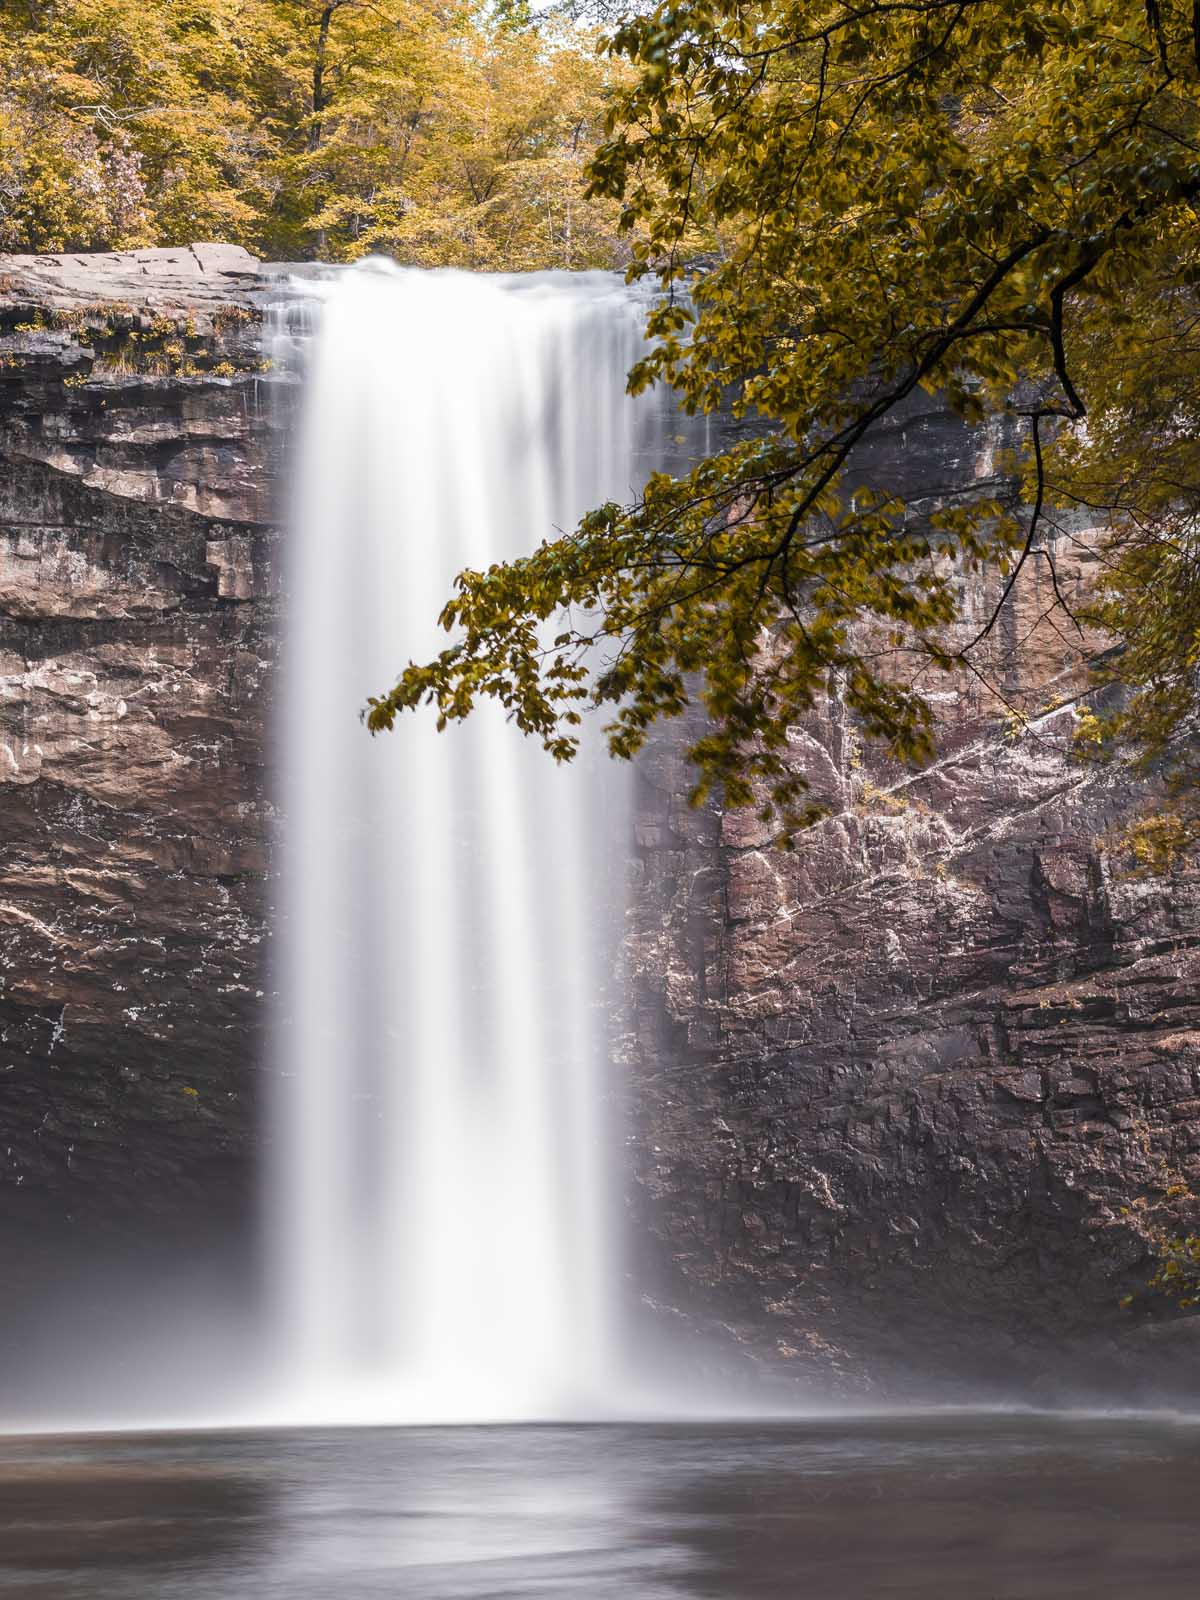 Best Hikes near Nashville Foster Falls Cumberland River in South Cumberland State Park